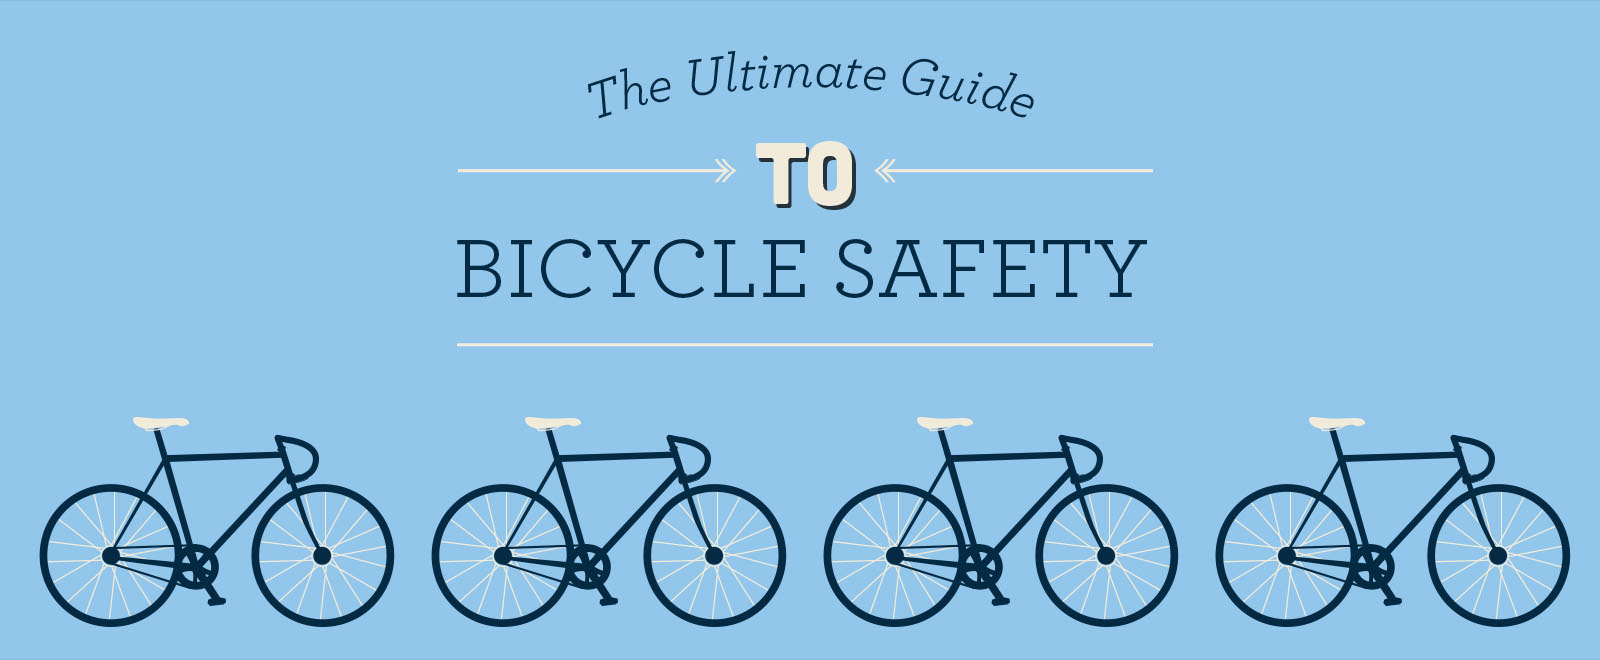 The Ultimate Guide To Bicycle Safety